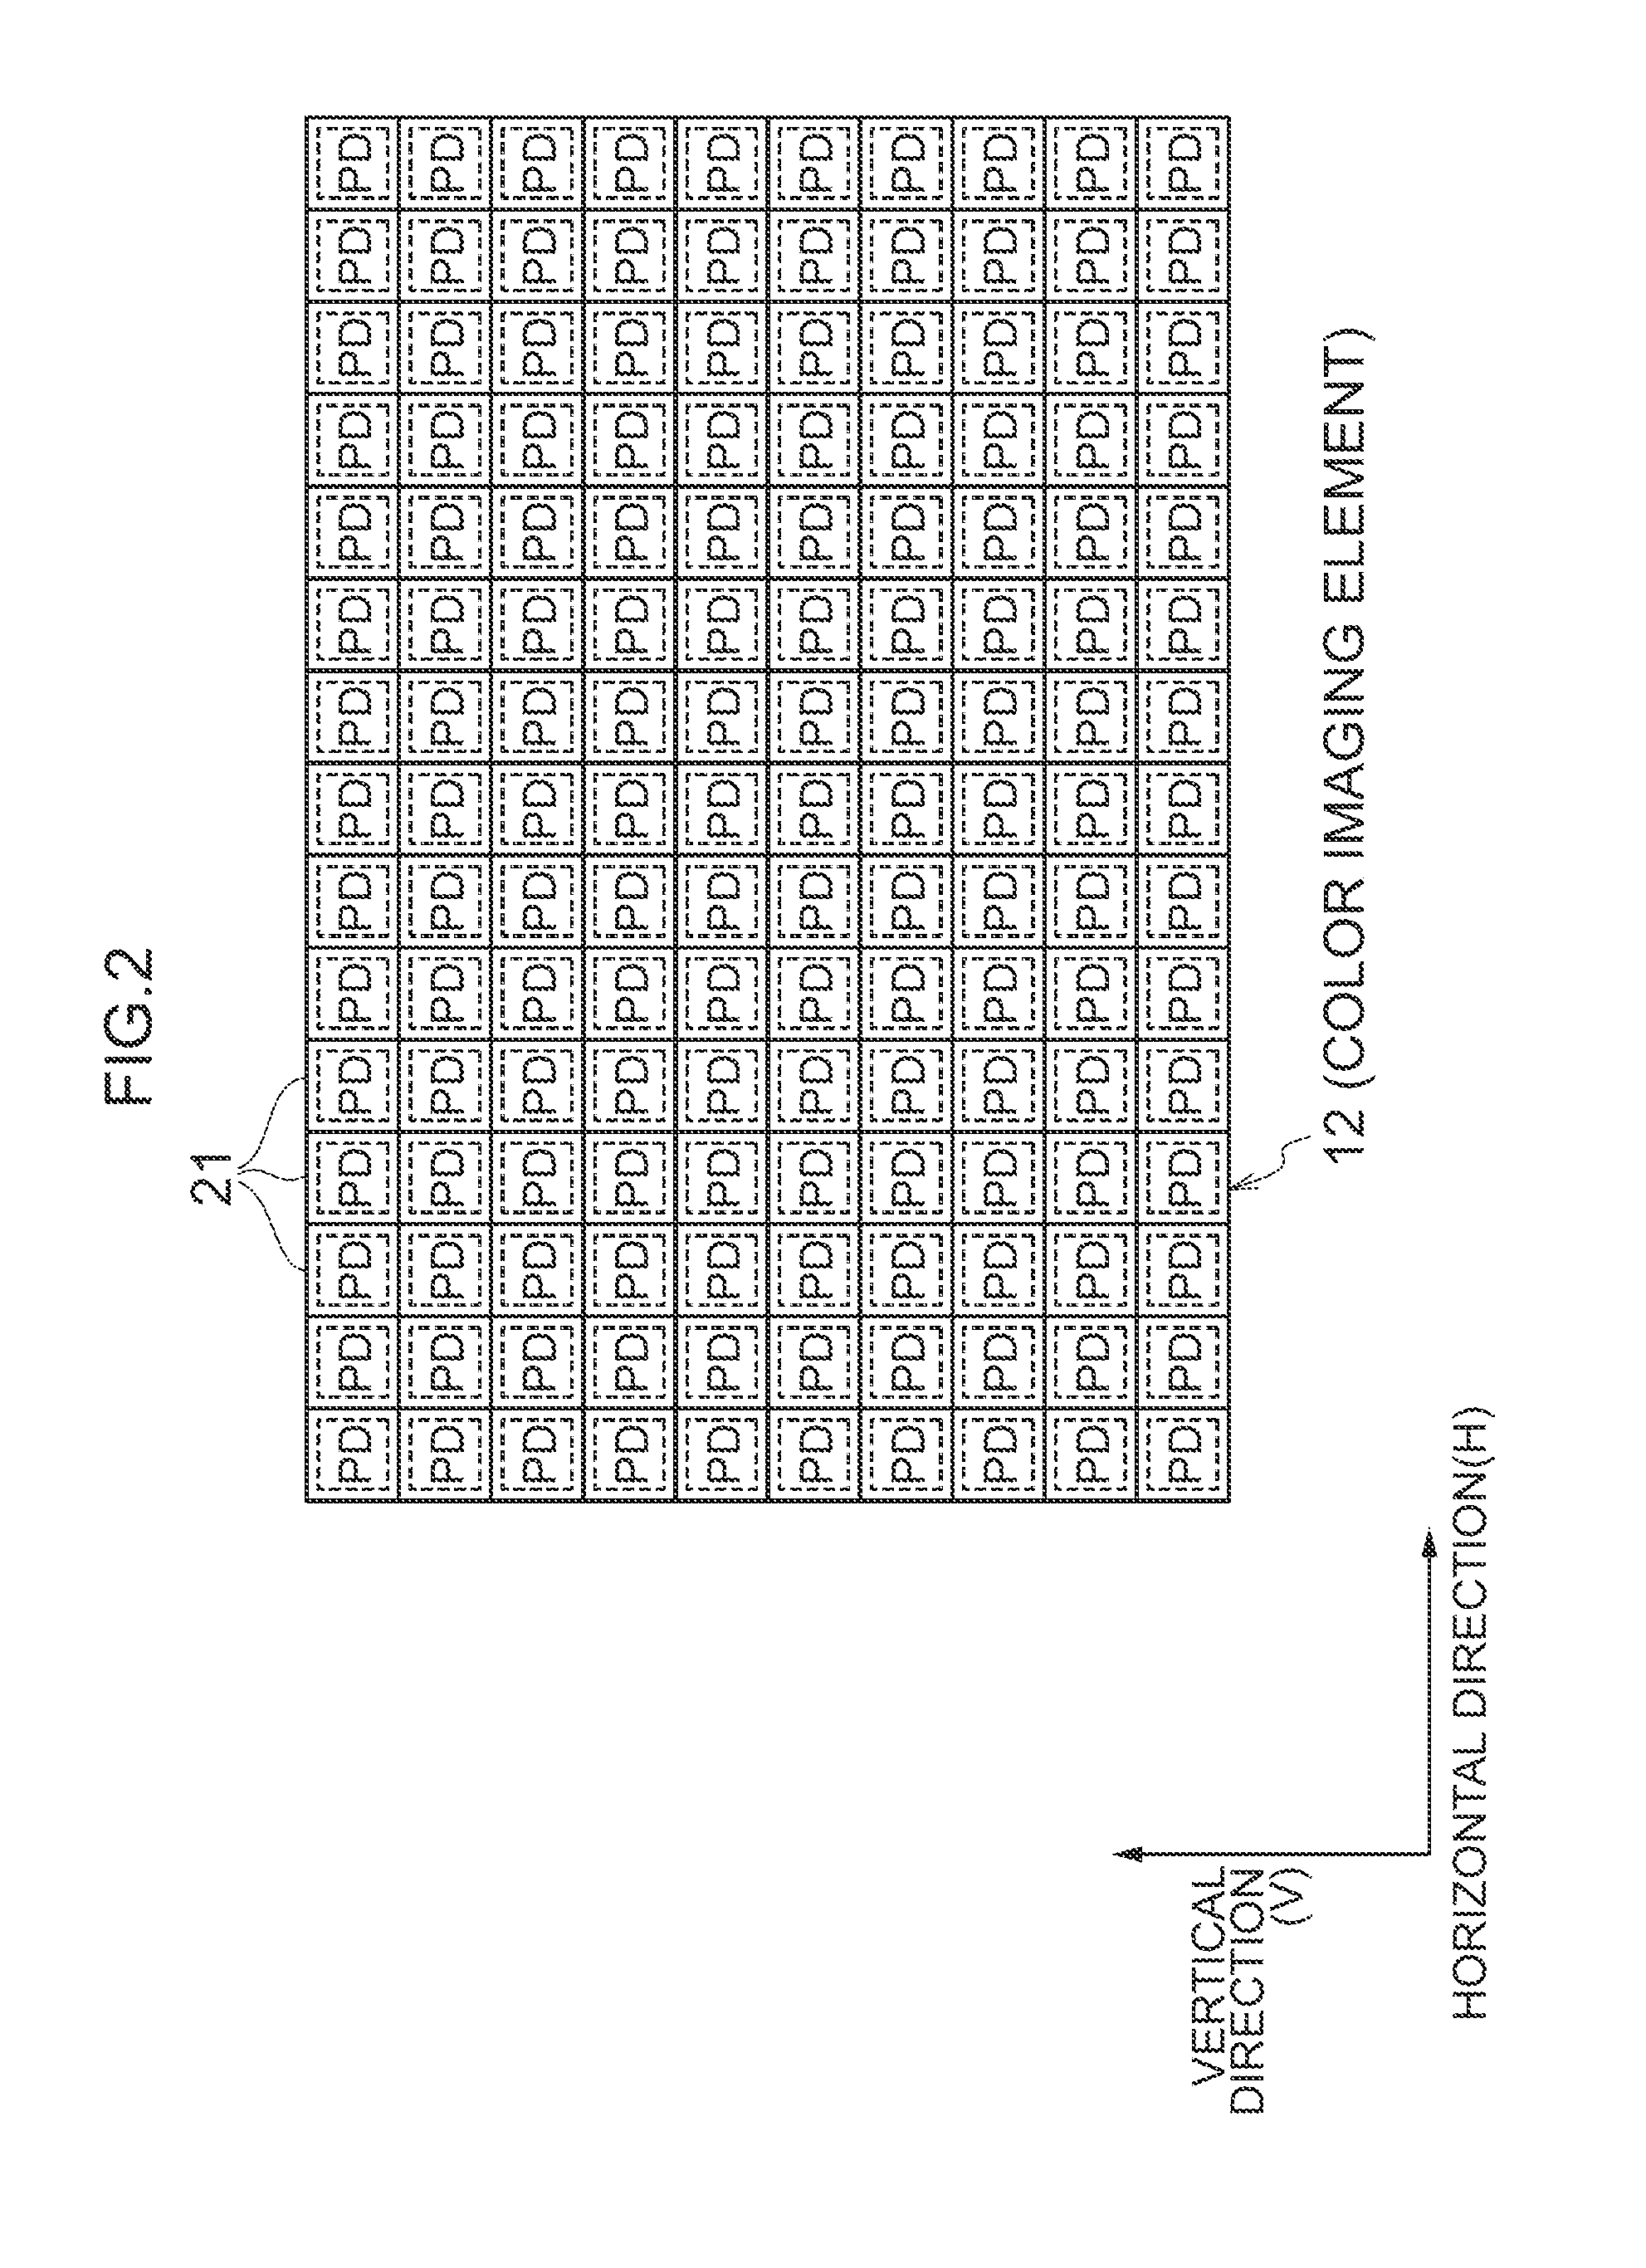 Color imaging element and imaging device